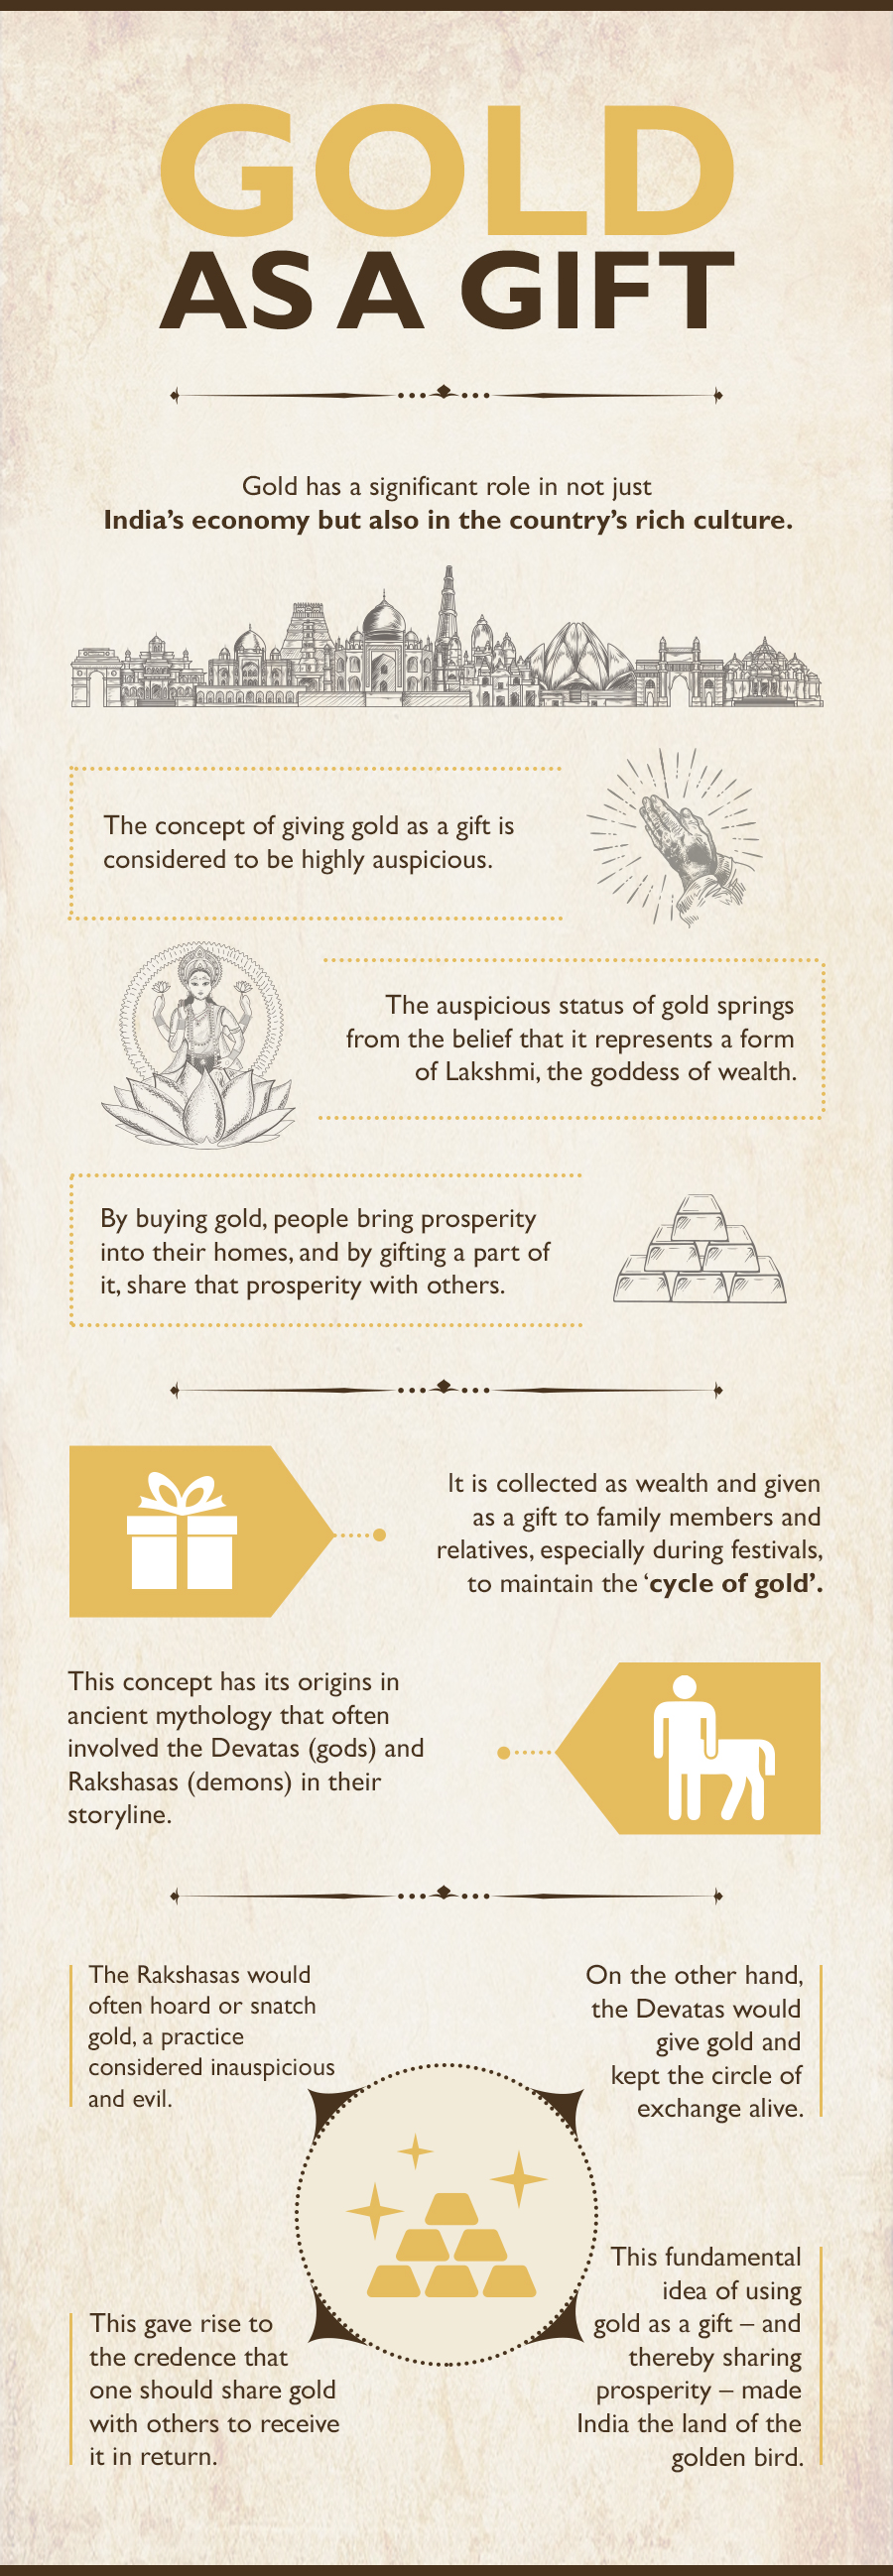 In India, no marriage is complete without the exchange of gold, as it is considered auspicious. The demand of gold metal is increasing and people are looking for exclusivity while buying gold items. Apart from jewellery and coins, one can also find several other gifting items made of gold metal.